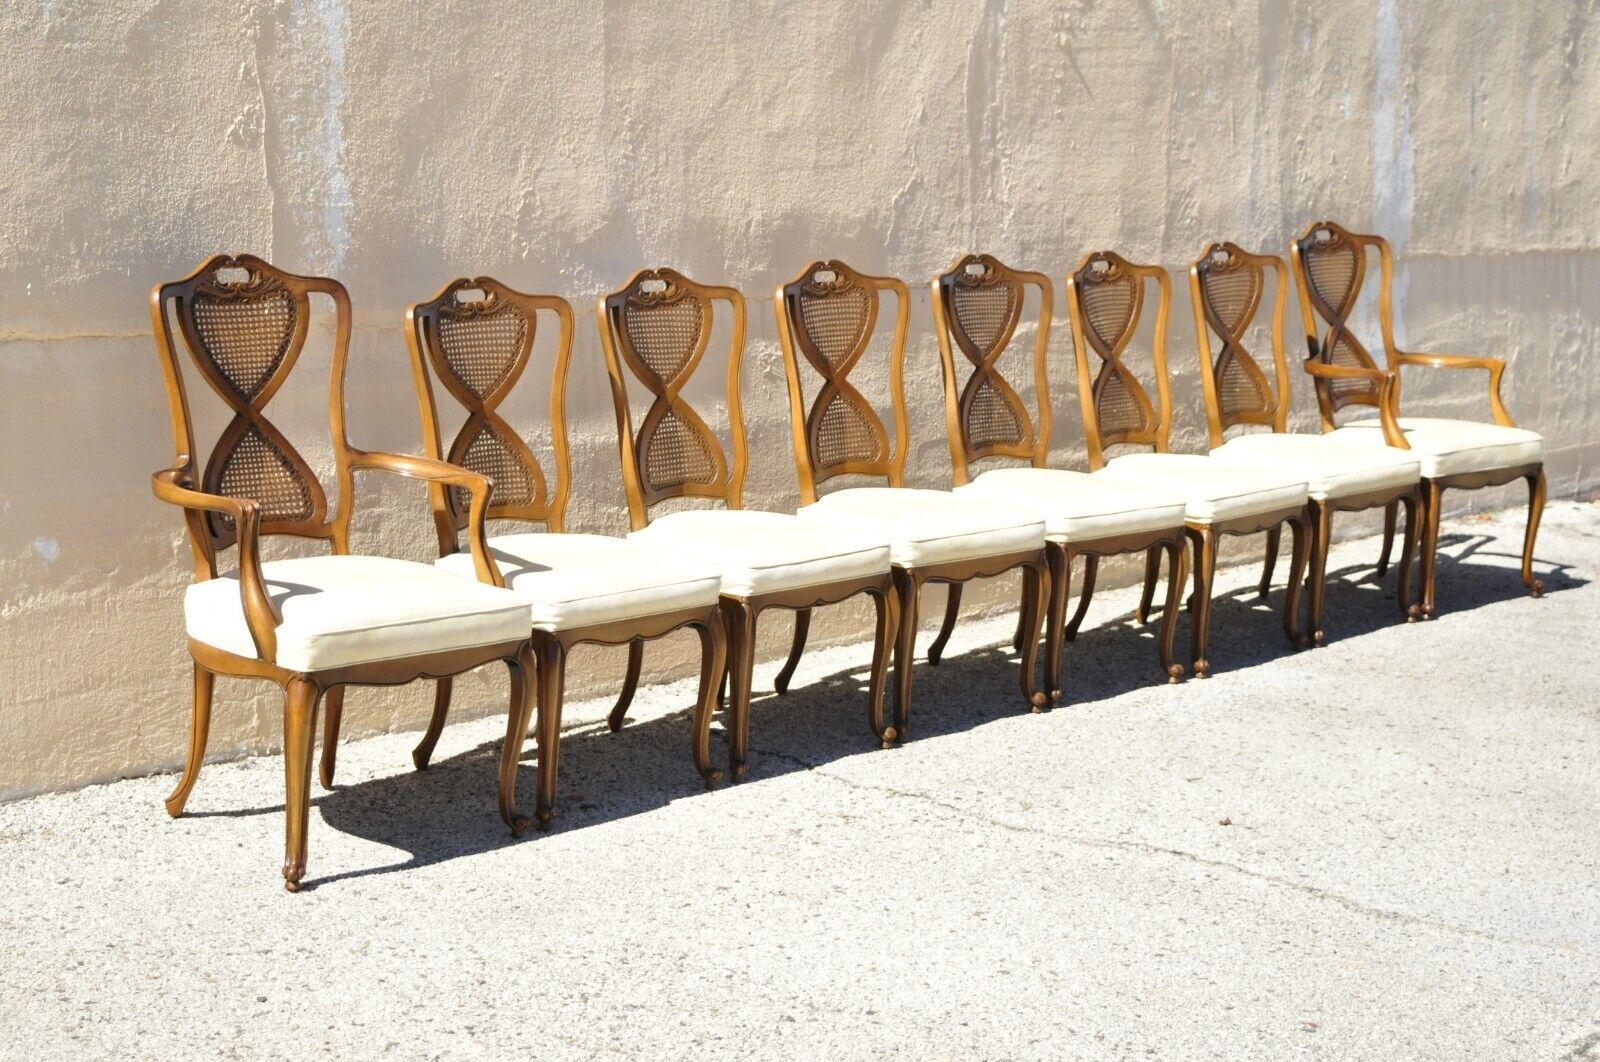 Vintage French provincial Hollywood Regency cane back pretzel twist dining chair - set of 8. Item features (2) armchairs, (6) side chairs, cane back panels, vinyl upholstered seats, pretzel twist carved backs, solid wood frames, cabriole legs. Circa